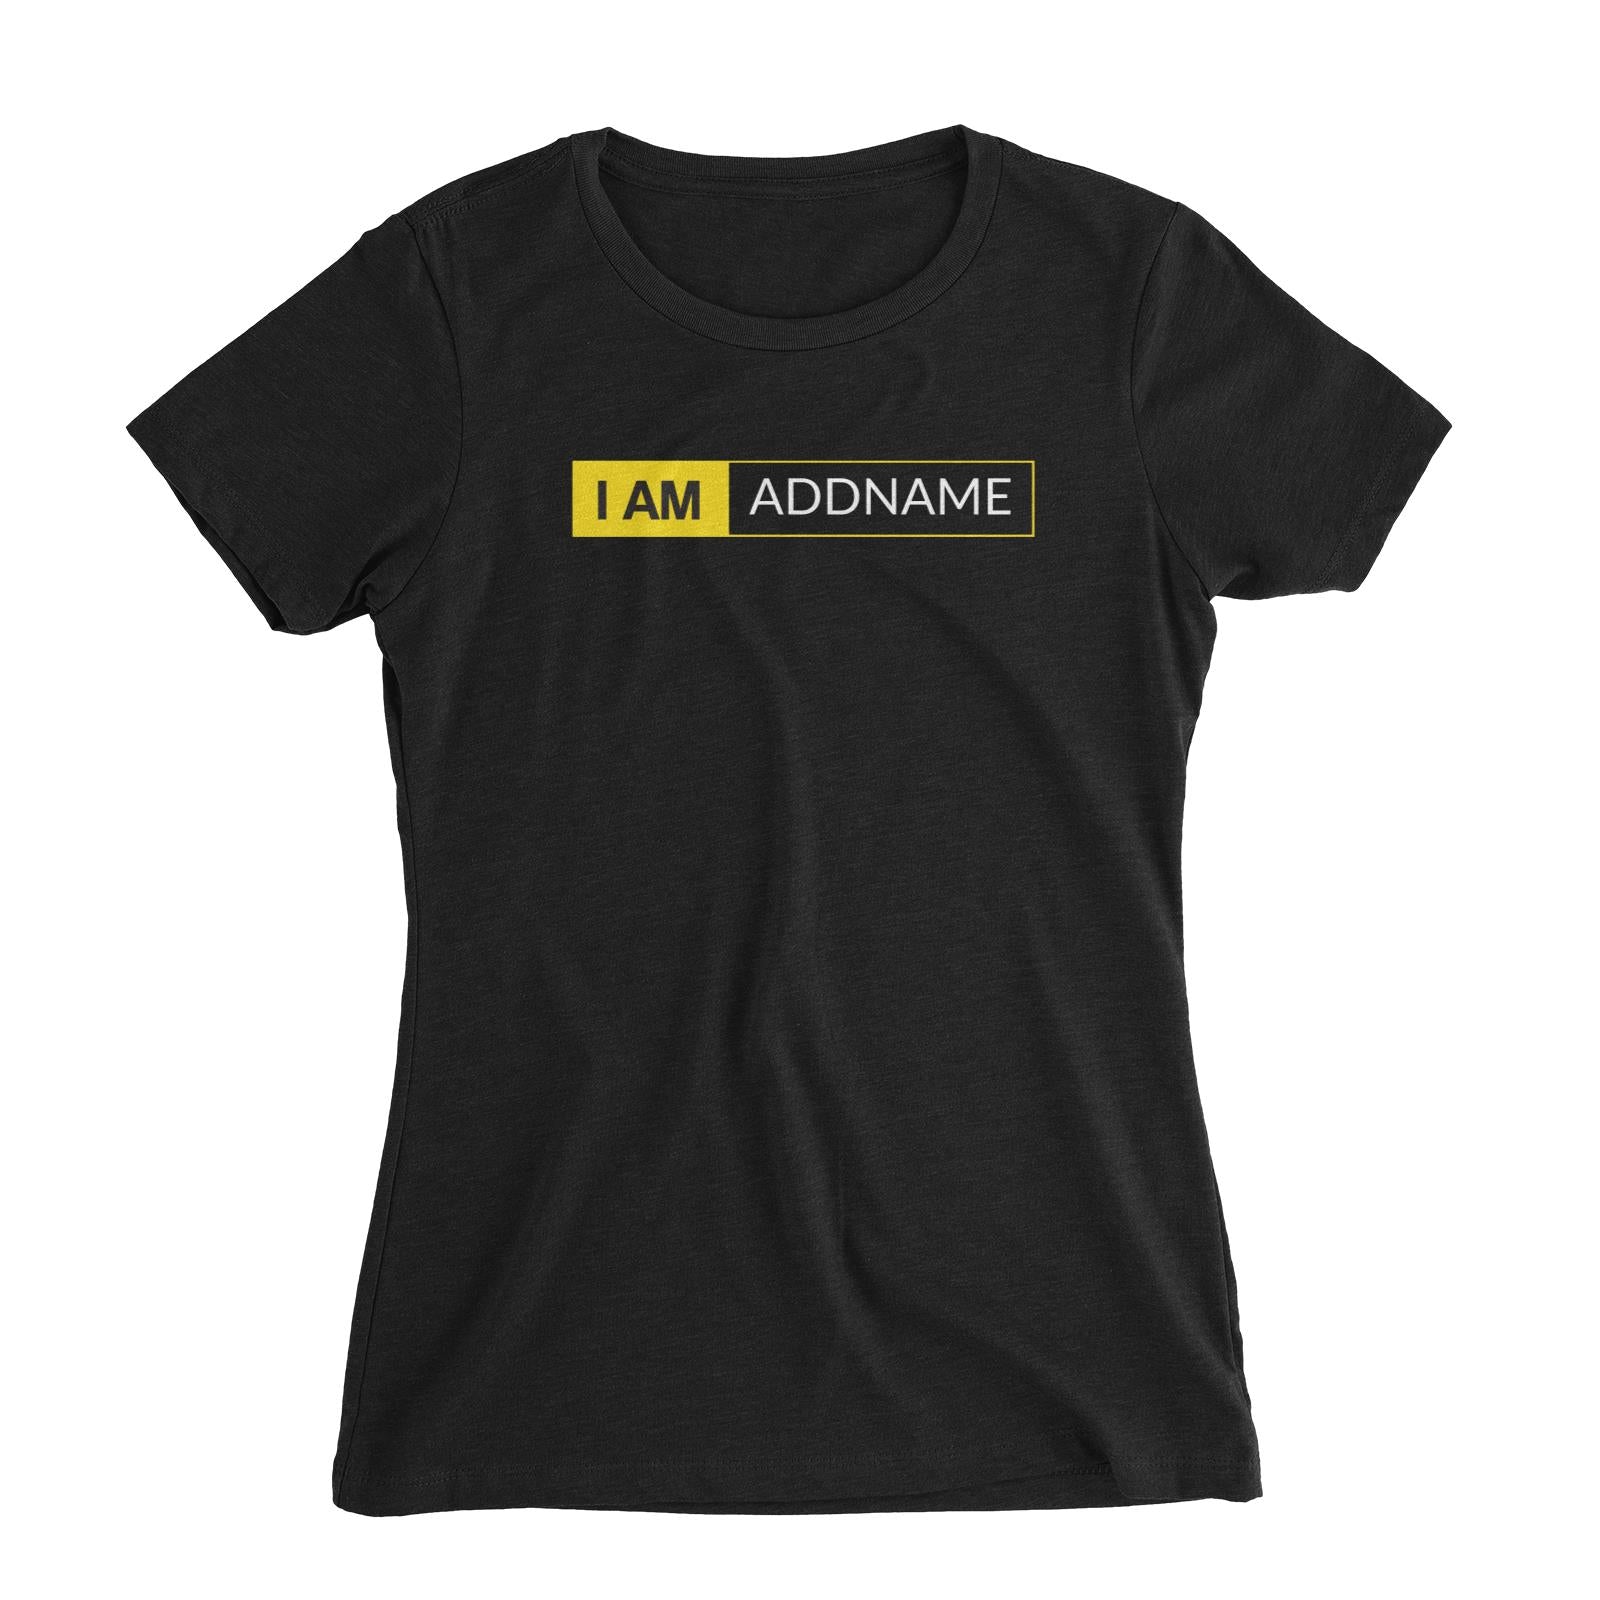 I AM Addname in Yellow Box Women's Slim Fit T-Shirt Basic Nikon Matching Family Personalizable Designs